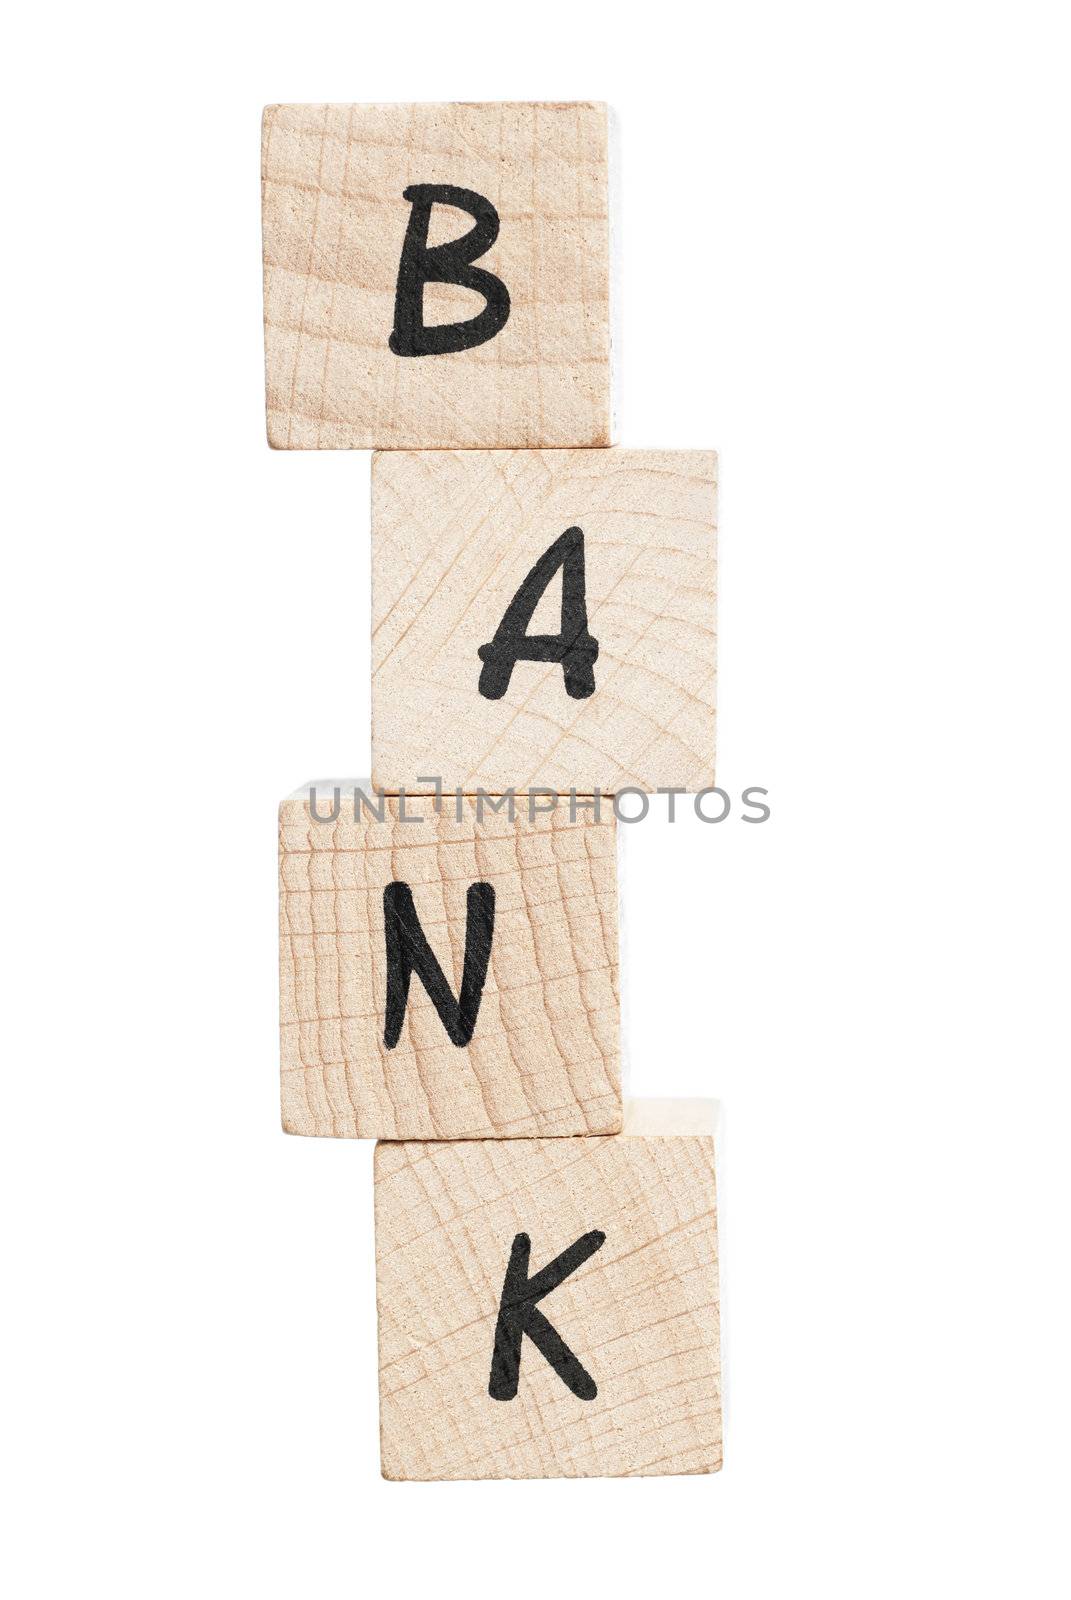 Bank spelled out with wooden blocks. White background.